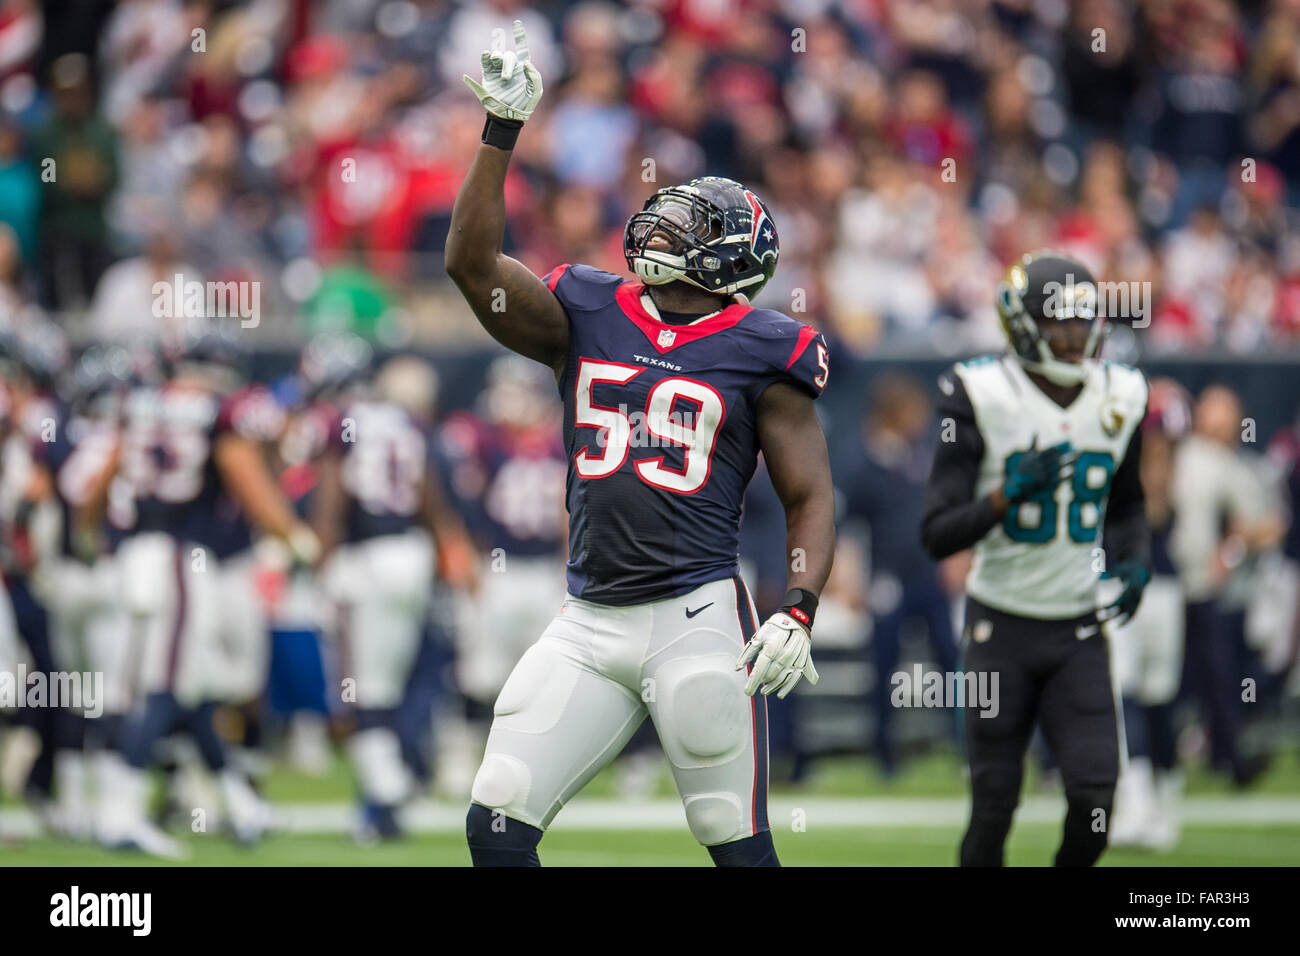 Houston, Texas, USA. 3rd Jan, 2016. Houston Texans outside linebacker Whitney Mercilus (59) celebrates after making a sack during the 2nd quarter of an NFL game between the Houston Texans and the Jacksonville Jaguars at NRG Stadium in Houston, TX on January 3rd, 2016. Credit:  Trask Smith/ZUMA Wire/Alamy Live News Stock Photo